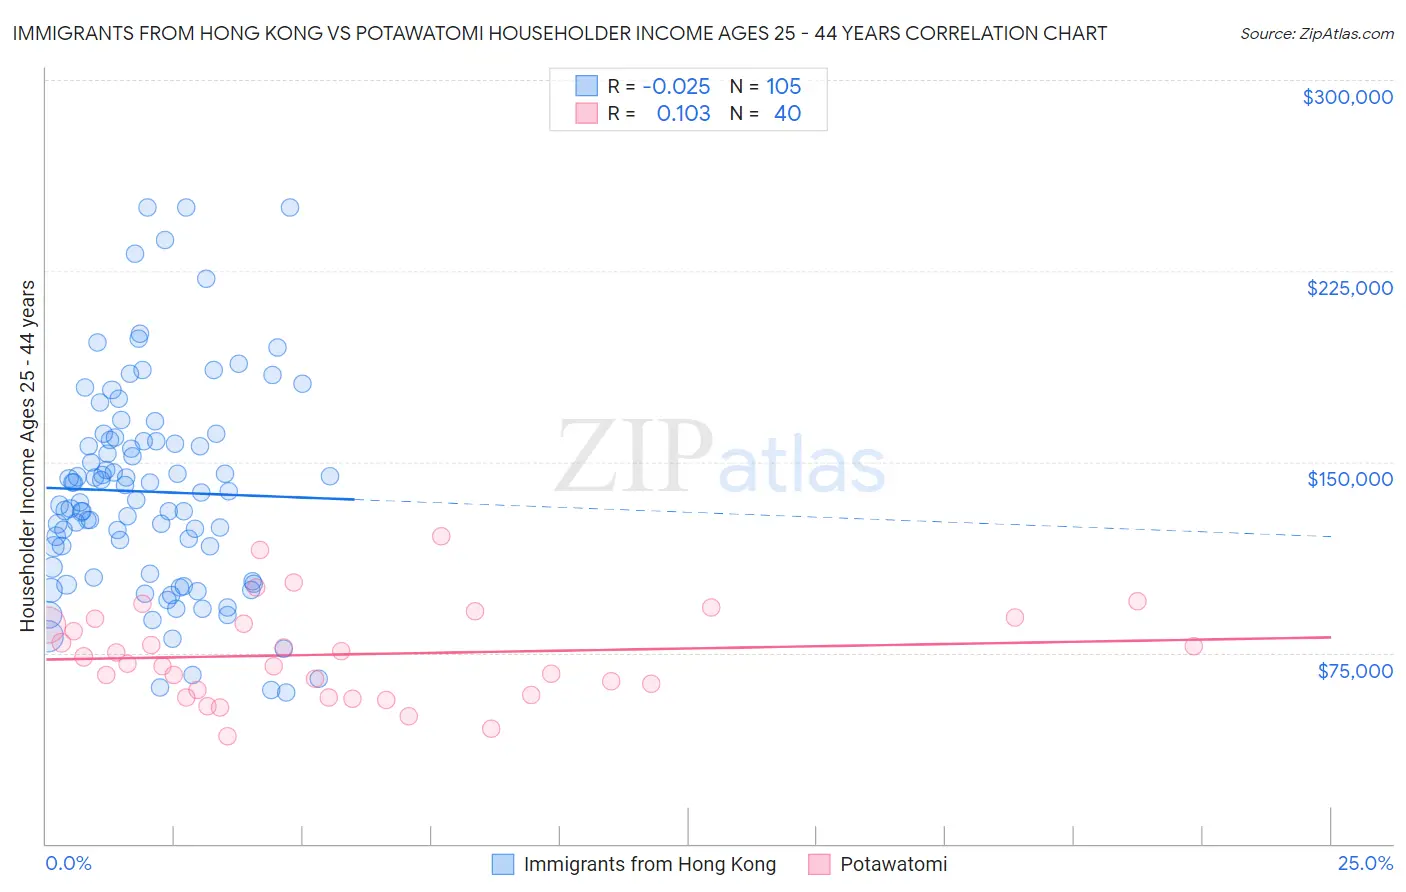 Immigrants from Hong Kong vs Potawatomi Householder Income Ages 25 - 44 years